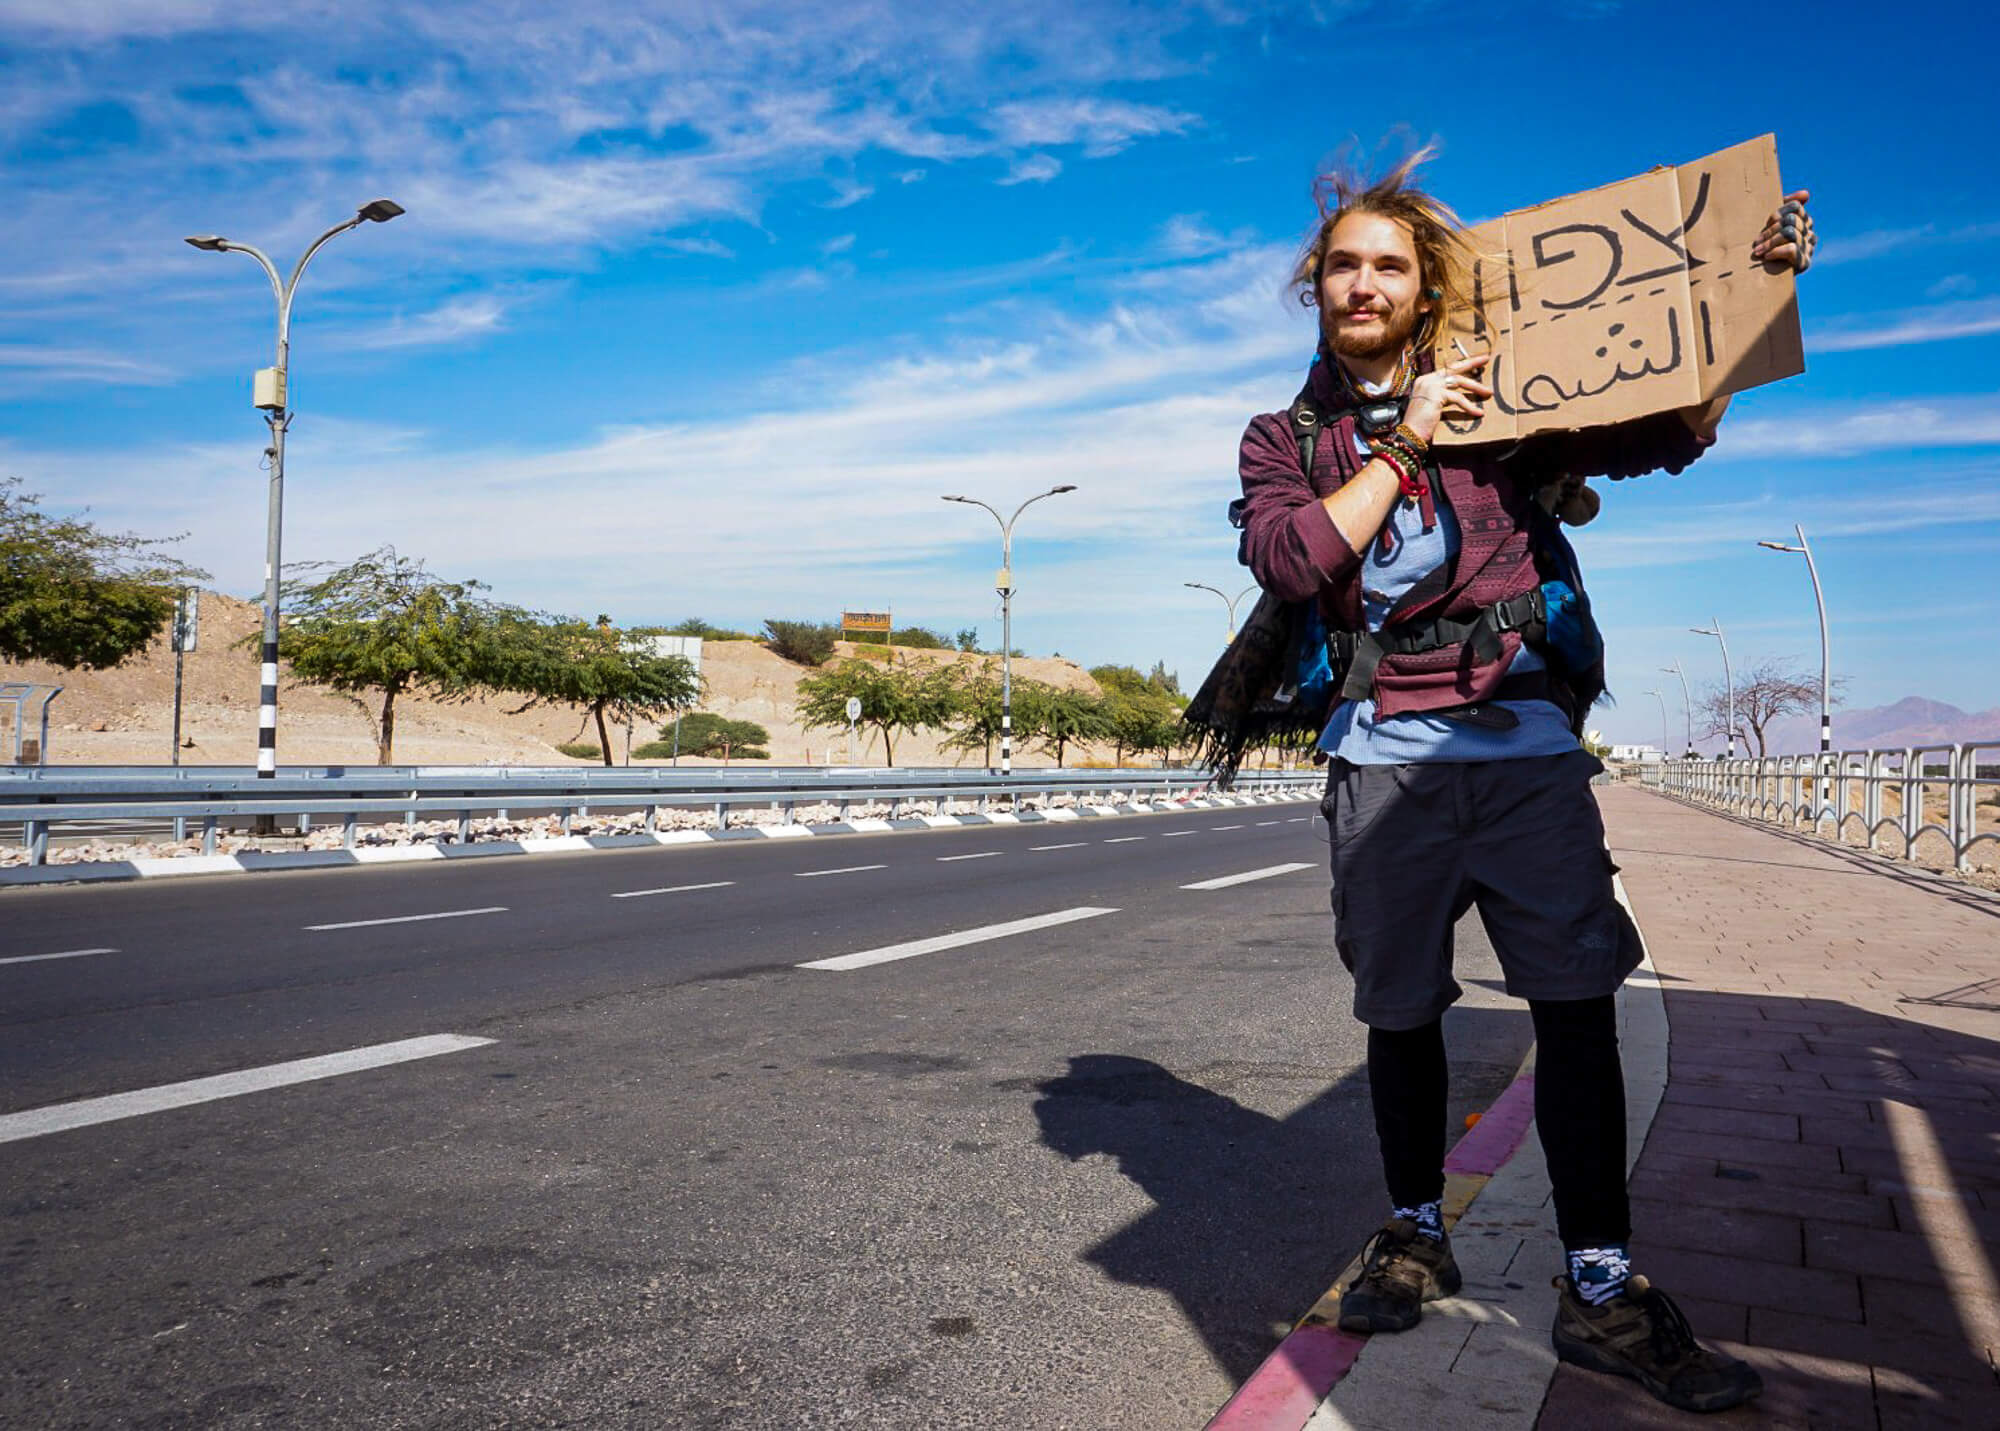 Hitchhiking in Israel - travel tip for saving money backpacking